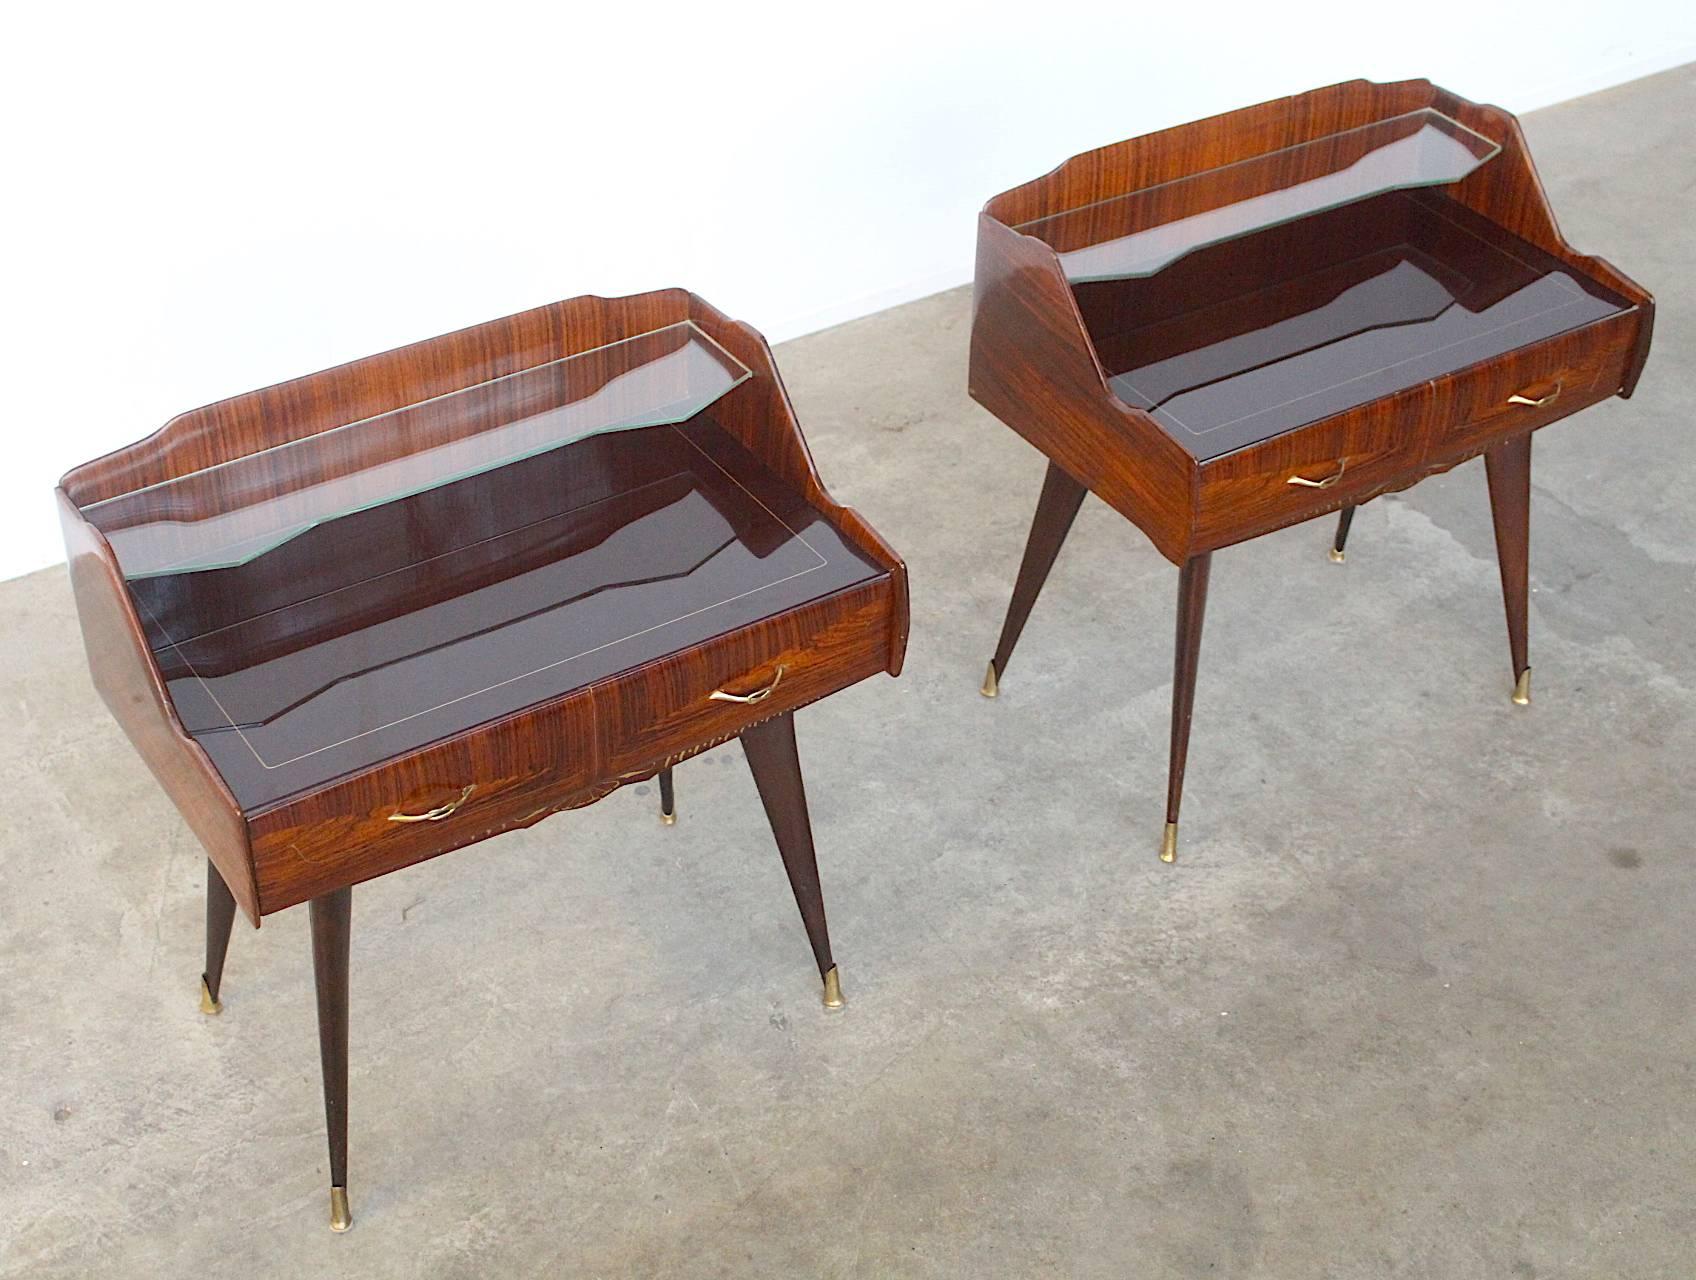 Very exquisite set of two beautifully carved nightstands or side tables executed in Fine rosewood. The size is typical -the nightstands are uncommonly wide, which makes them stand out and being very elegant and eye-catching. Also the glass tops are